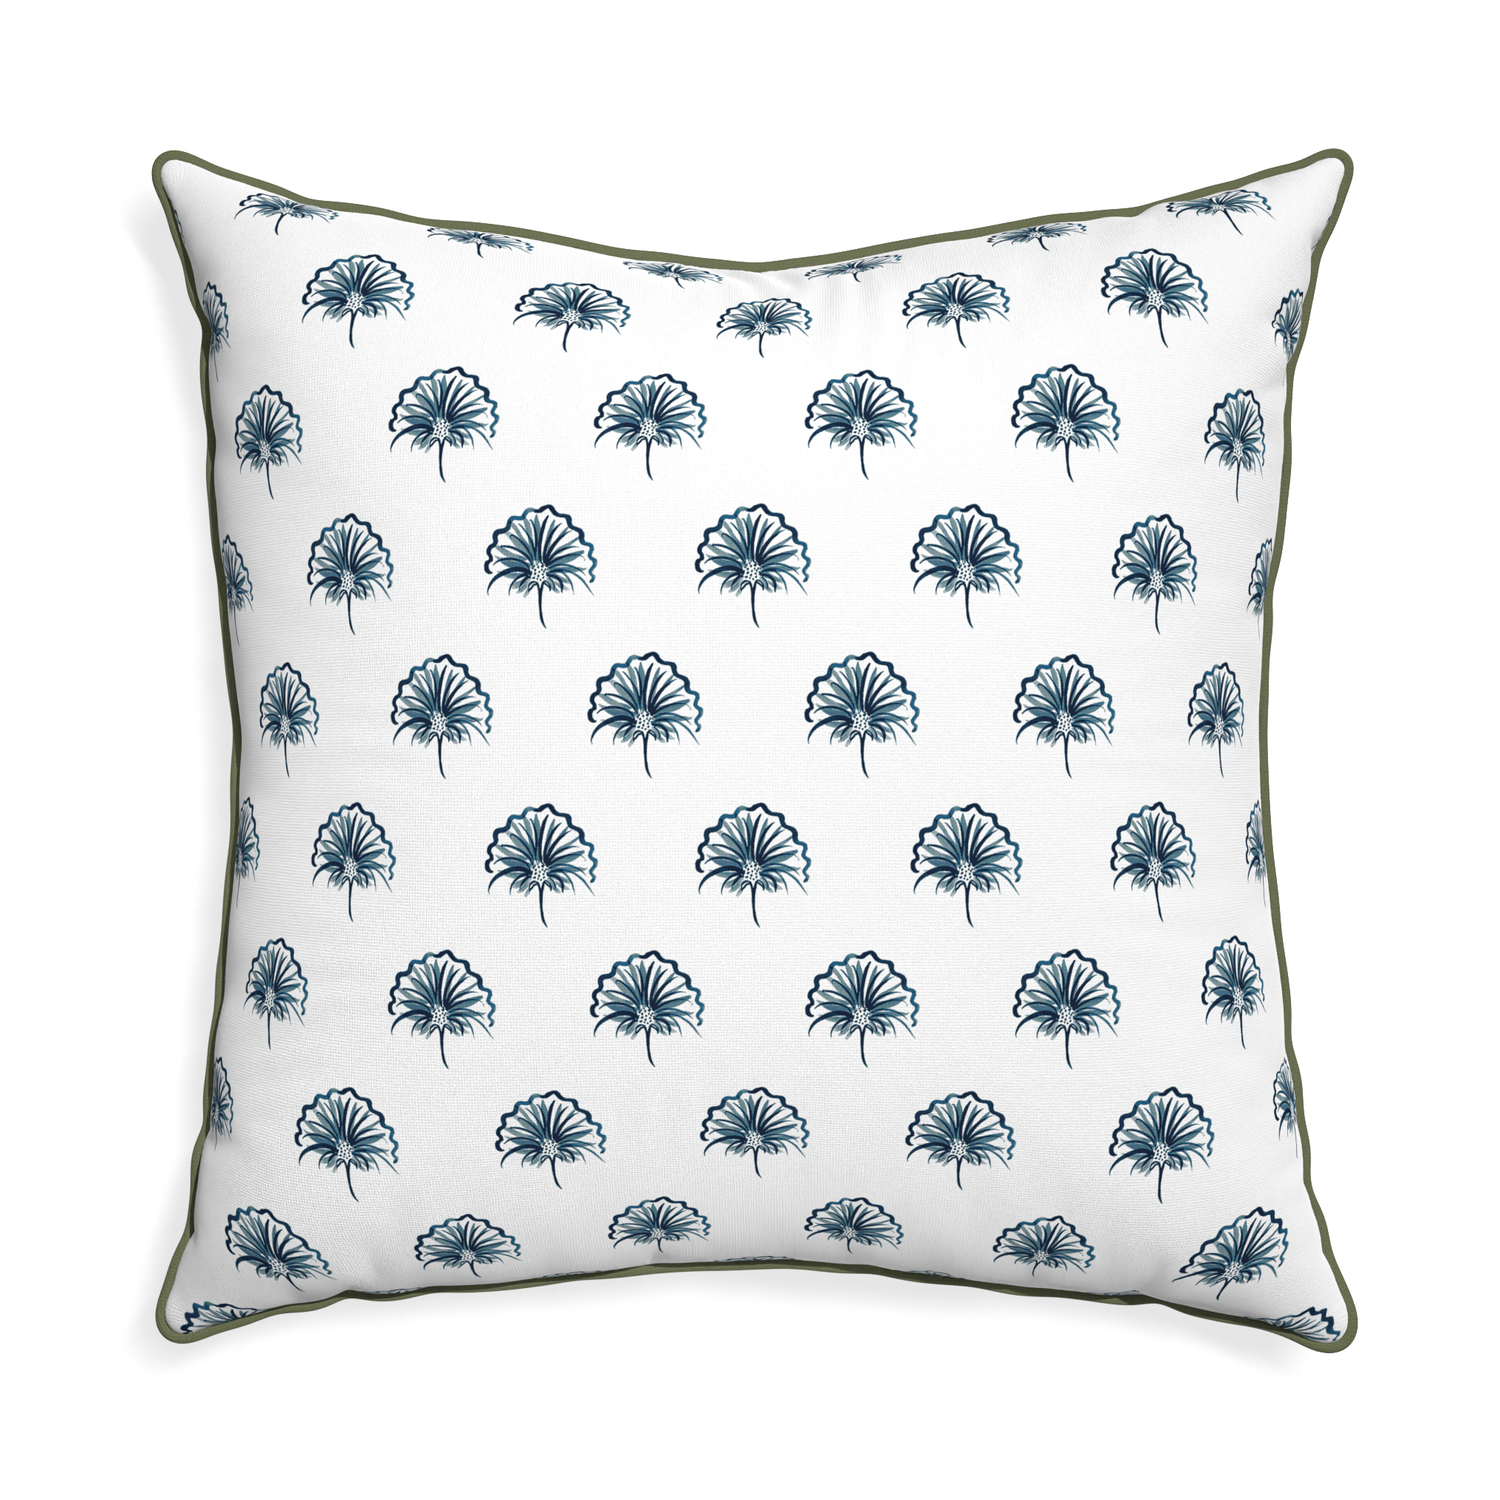 Euro-sham penelope midnight custom floral navypillow with f piping on white background